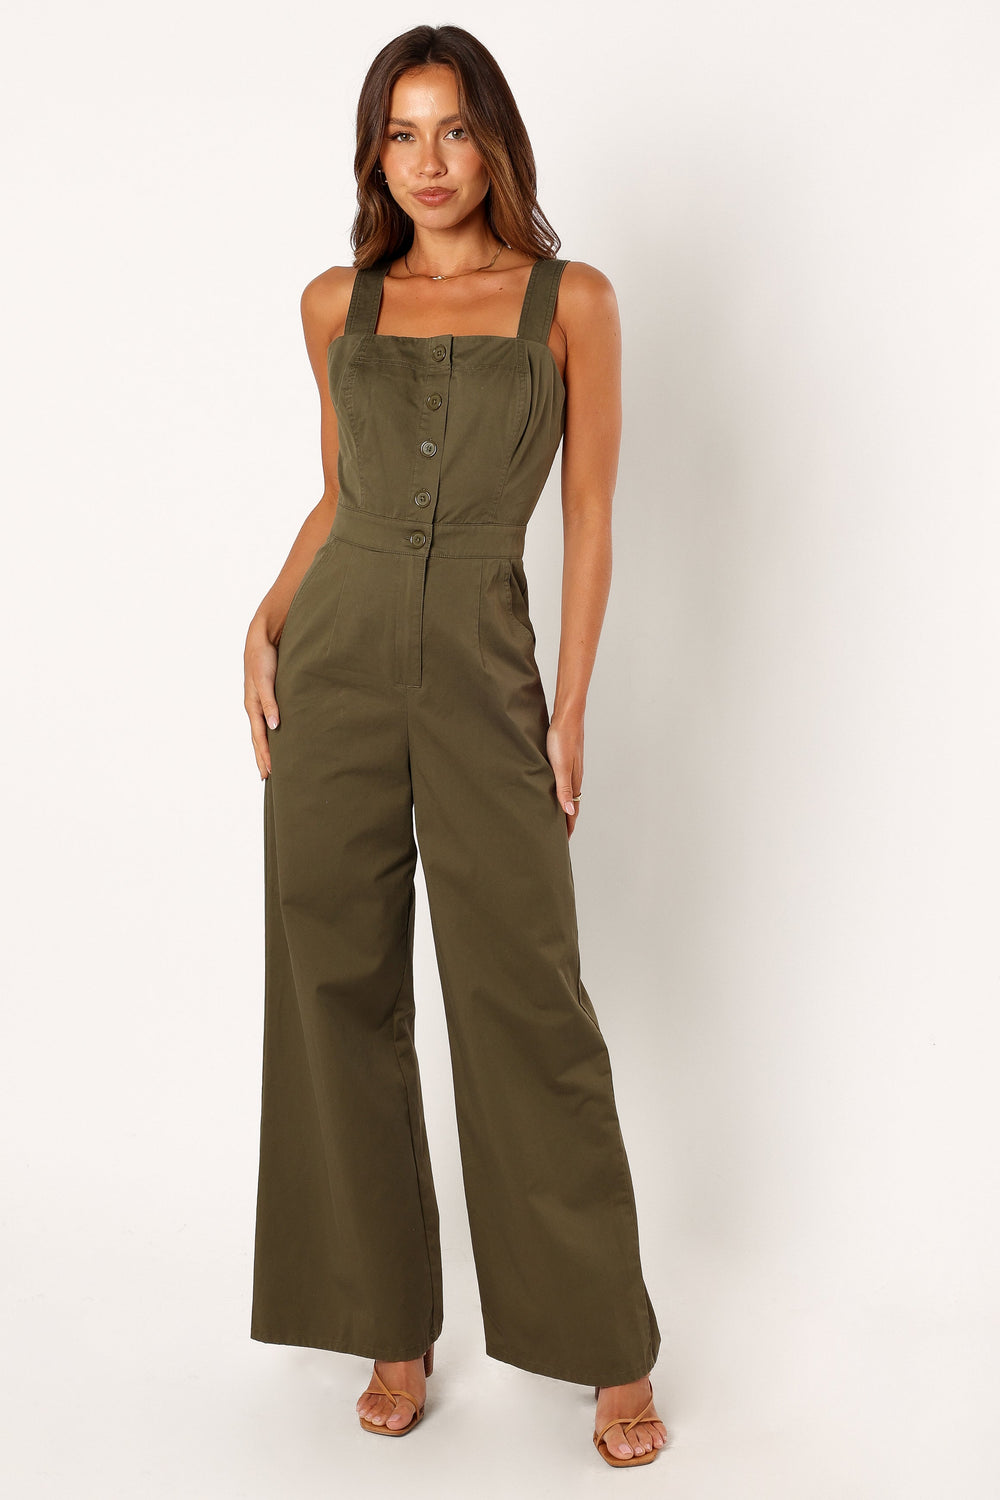 Petal and Pup USA Rompers Gwen Jumpsuit - Olive